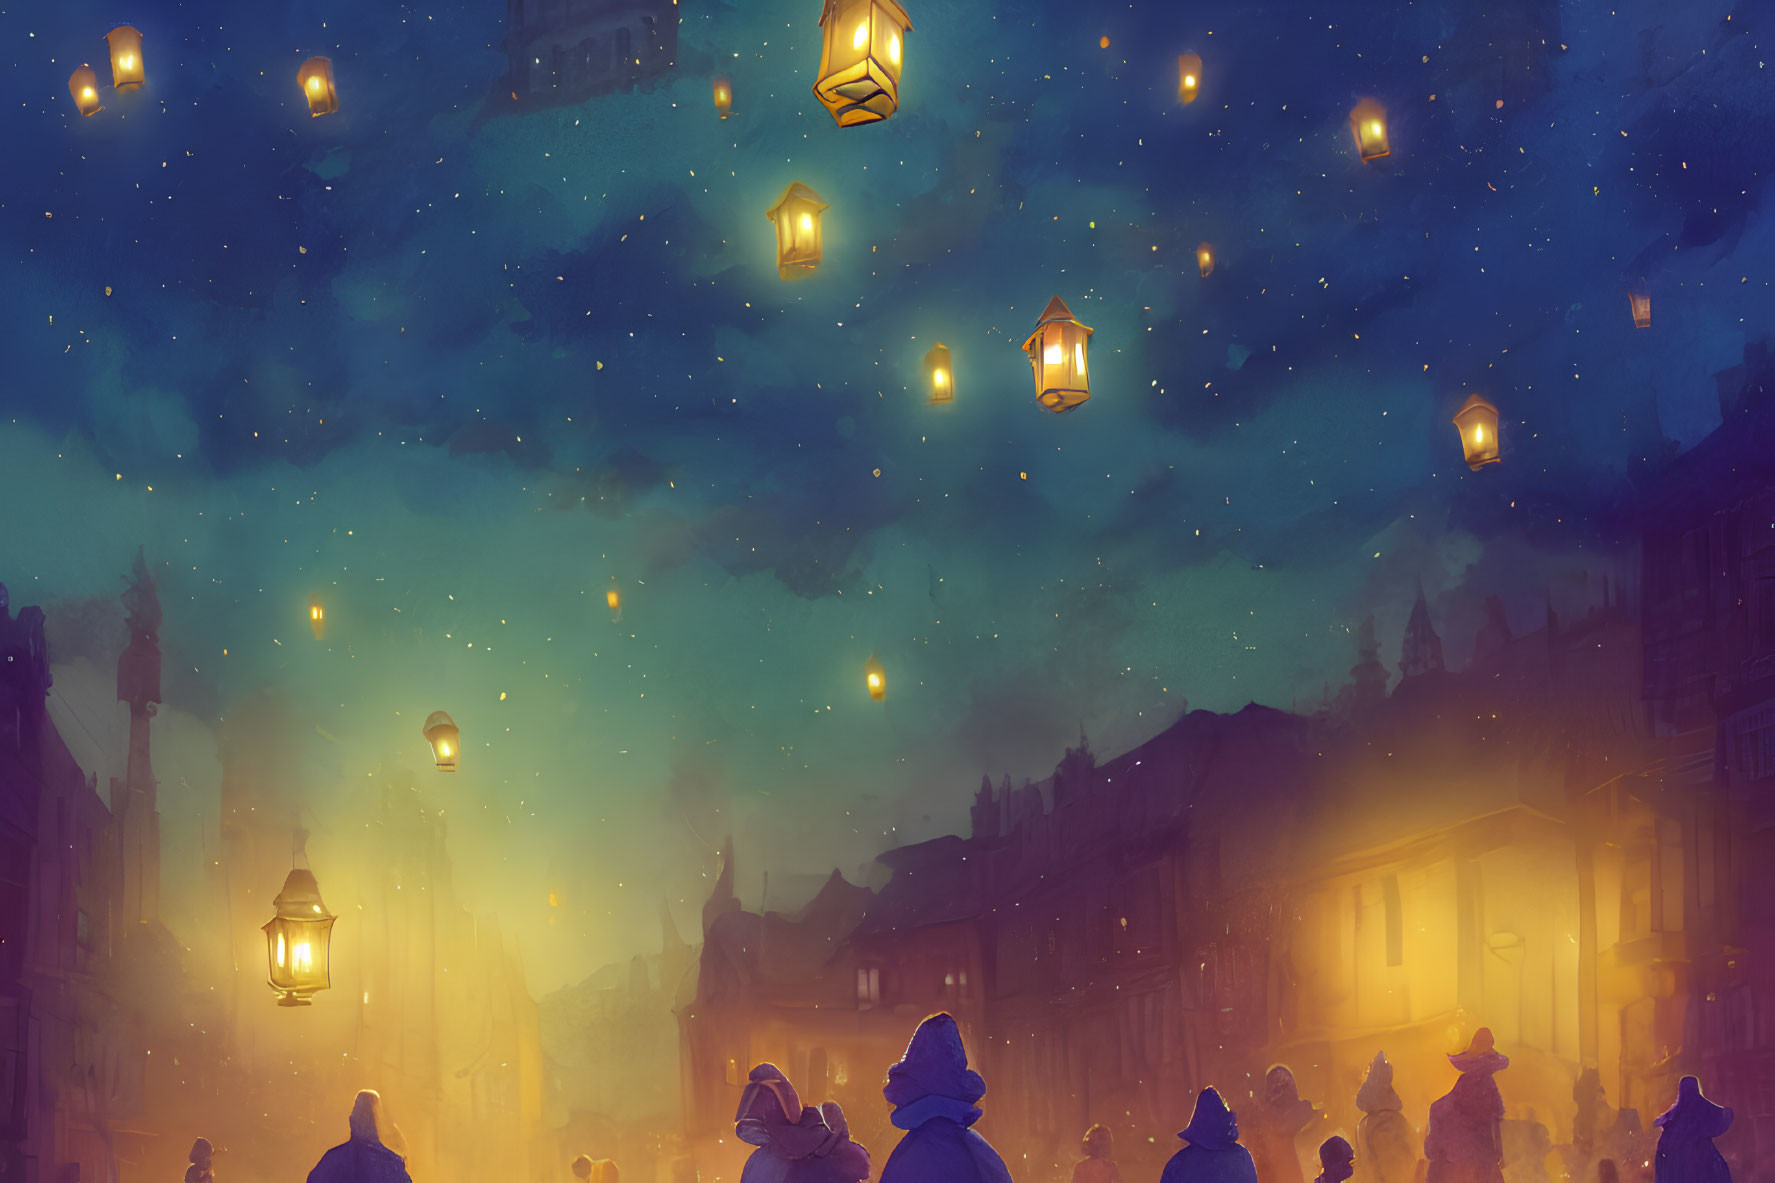 Crowded street under evening sky with floating lanterns